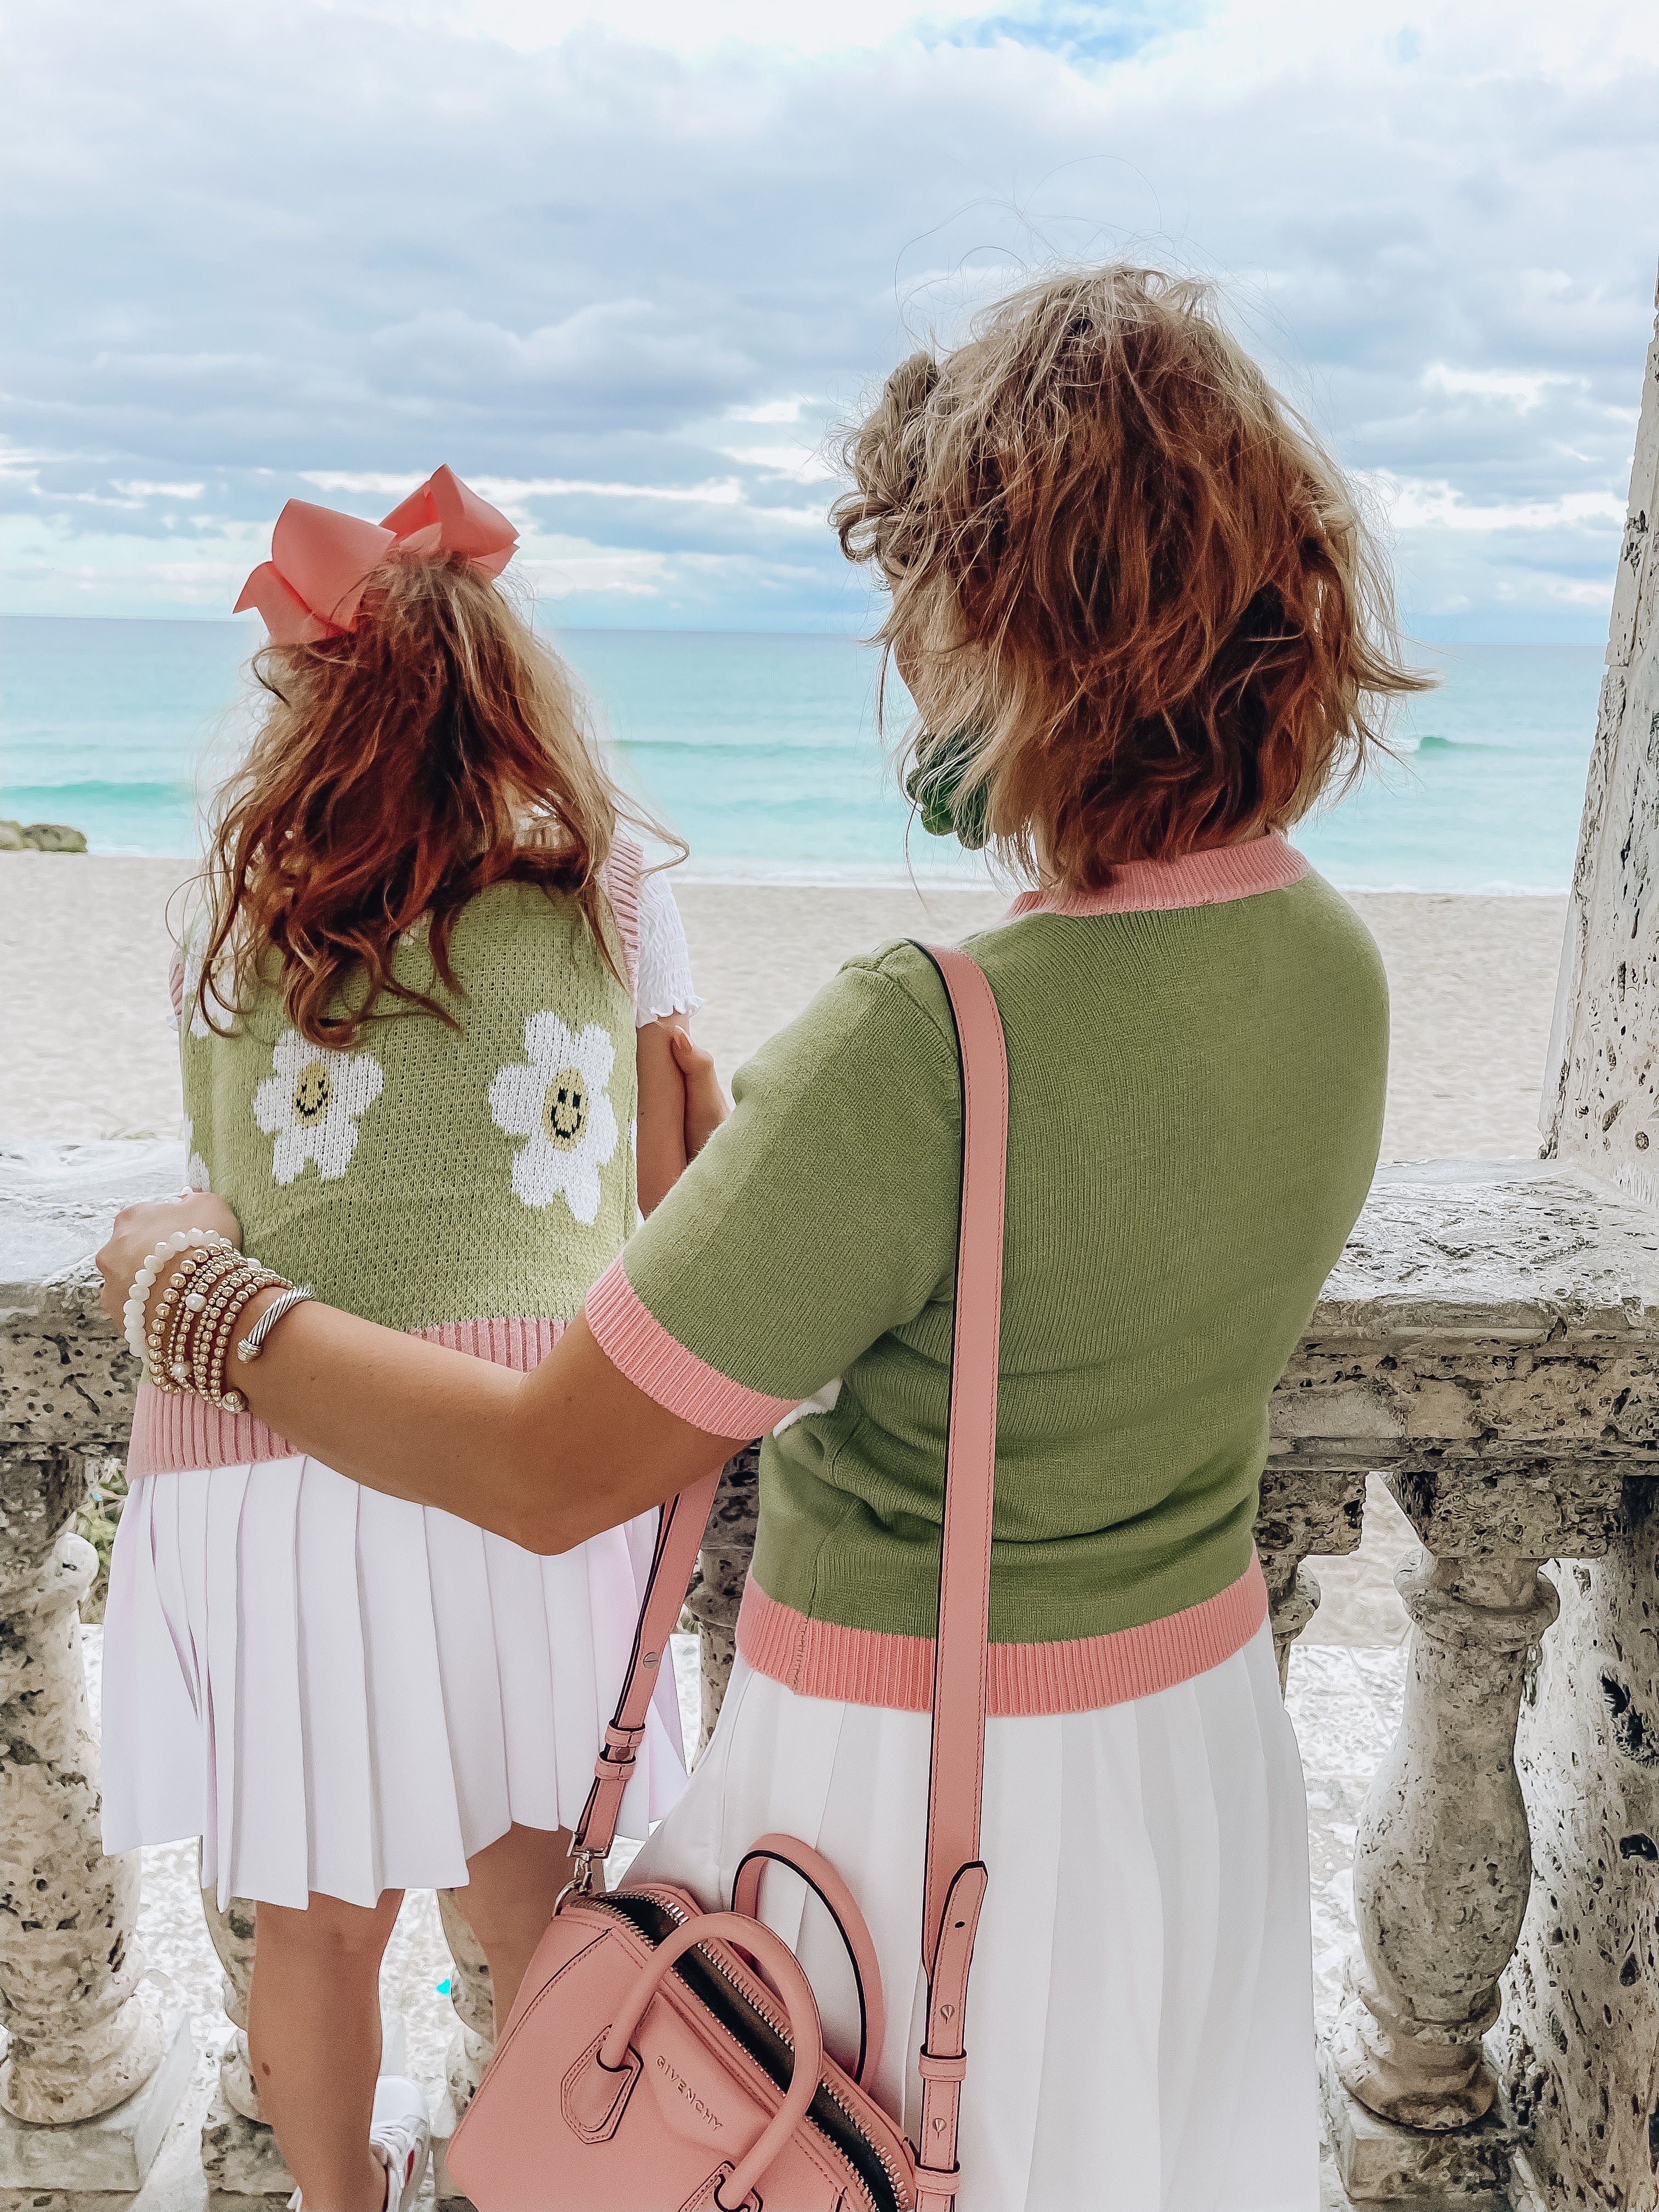 Our February Beach Vacation to Singer Island, Palm Beach & St. Augustine - Something Delightful Blog #PalmBeachTravelGuide #SingerIsland #StAugustine #SaintAugustine #BeachVacation #Spring2022Style